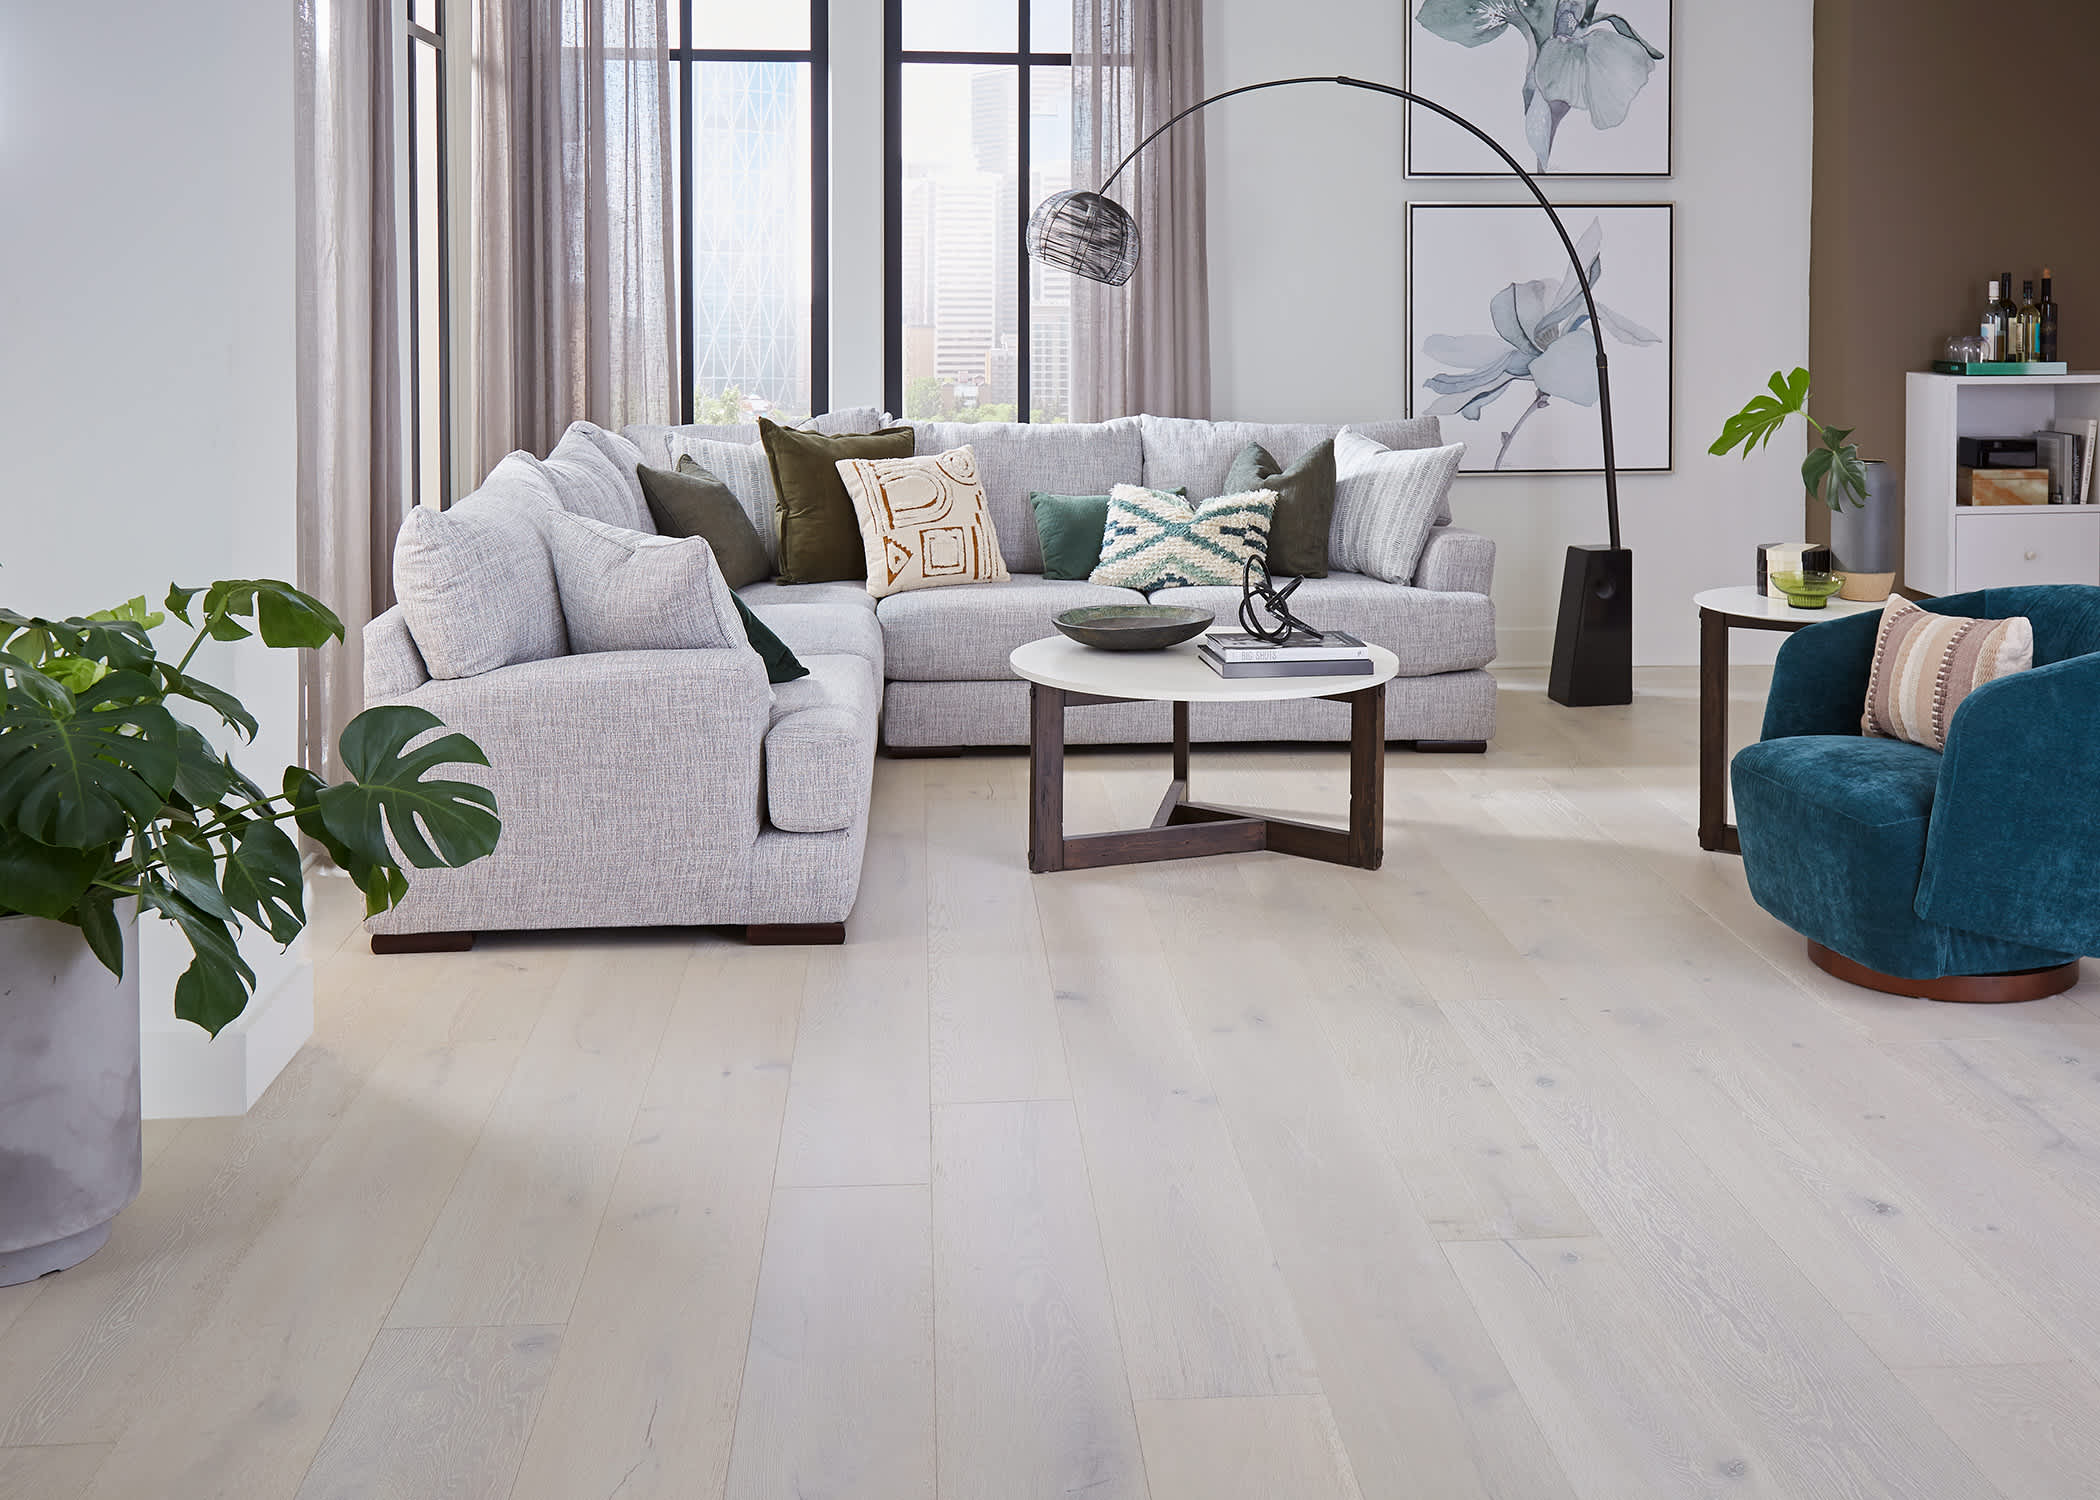 white washed engineered hardwood floor in living room with light gray sectional sofa and dark turquoise barrel side chair and brown walls